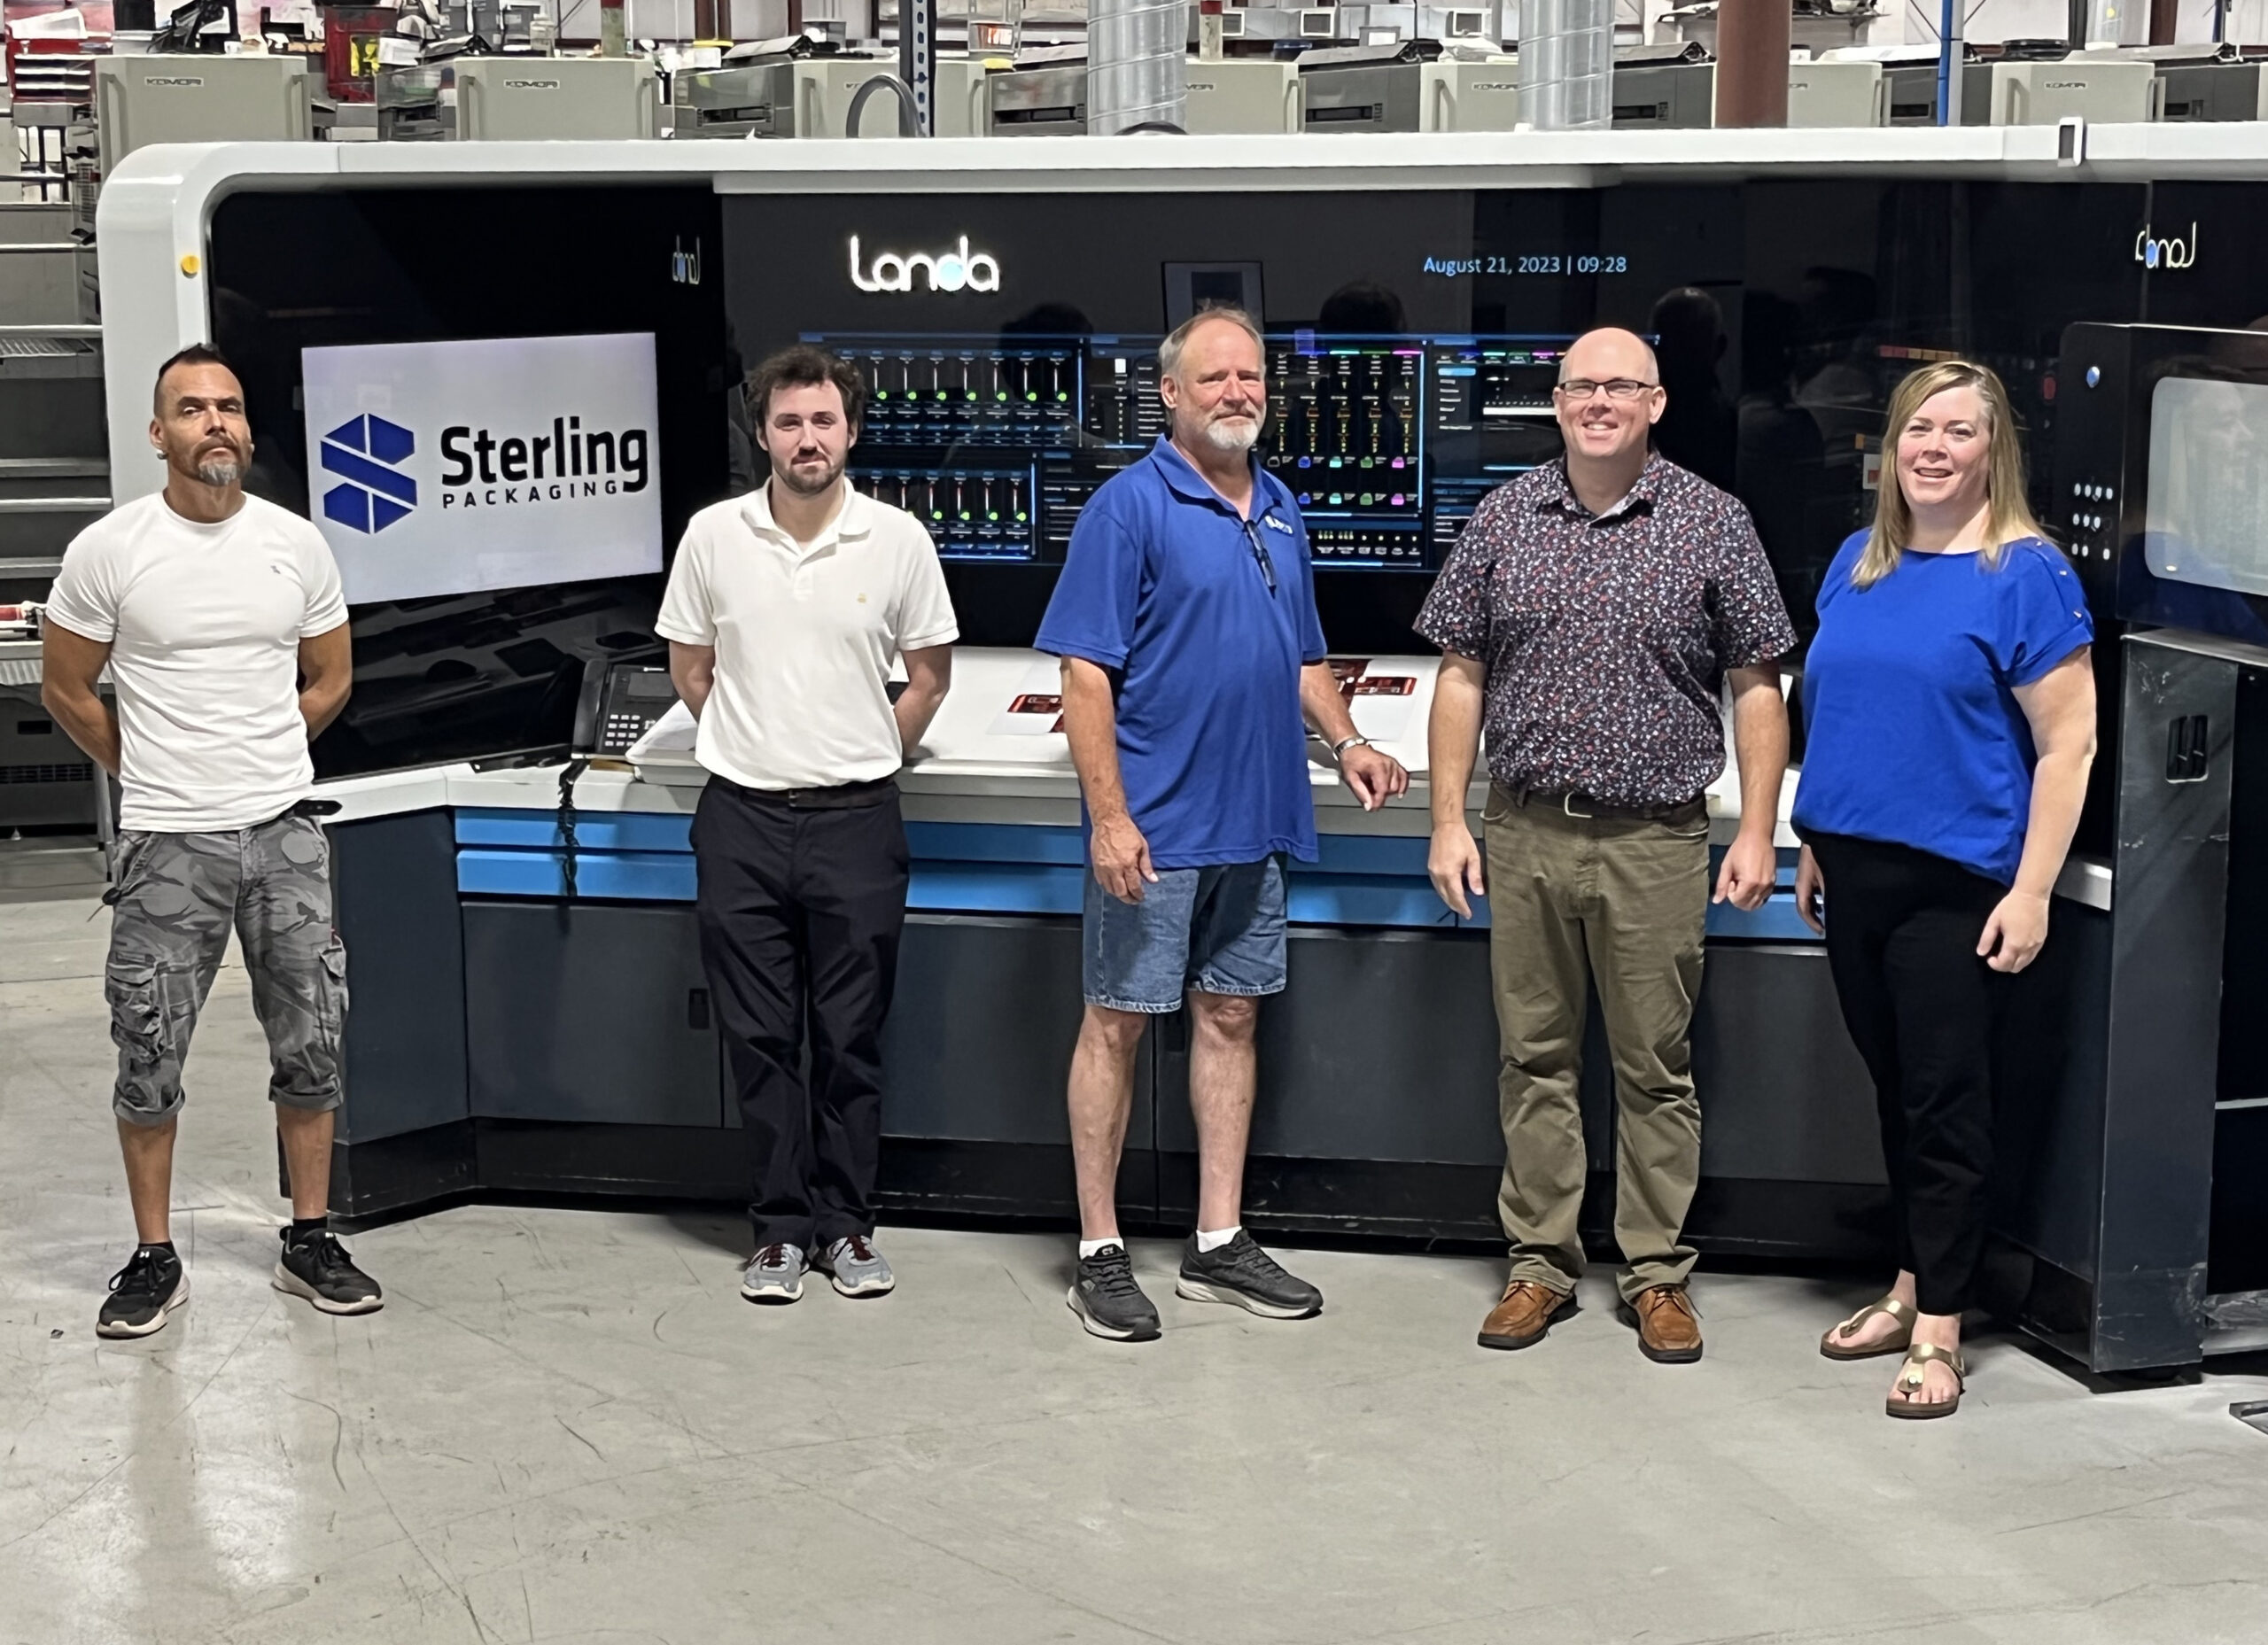 Sterling Packaging Acquires a 41” Landa S10 Nanographic Printing Press